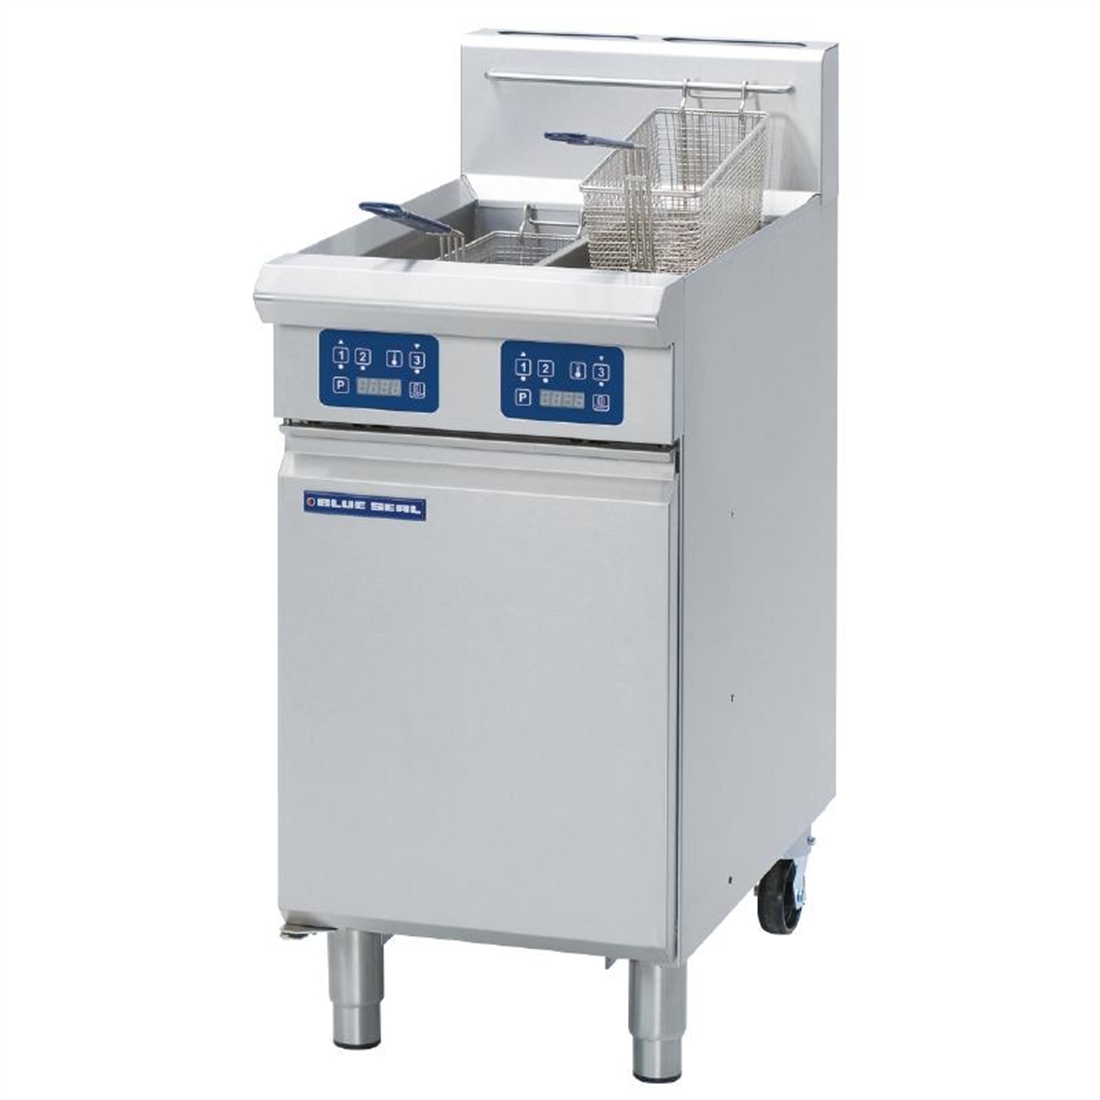 Blue Seal Evolution Vee Ray Twin Tank Fryer with Elec Controls Nat Gas450mm GT46E/N